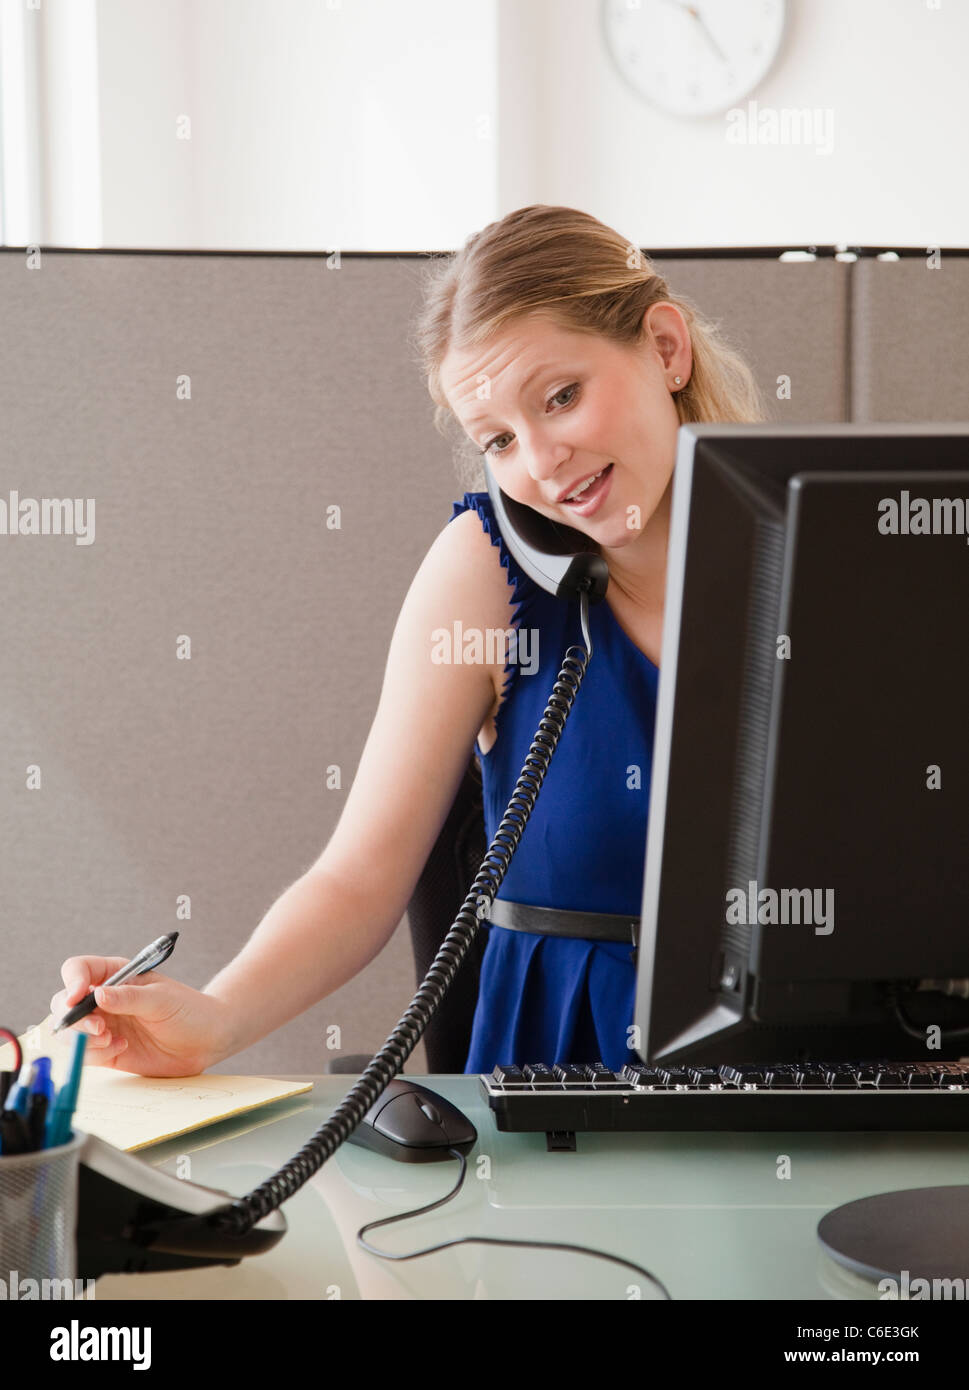 USA, New Jersey, Jersey City, Young woman working in office Stock Photo